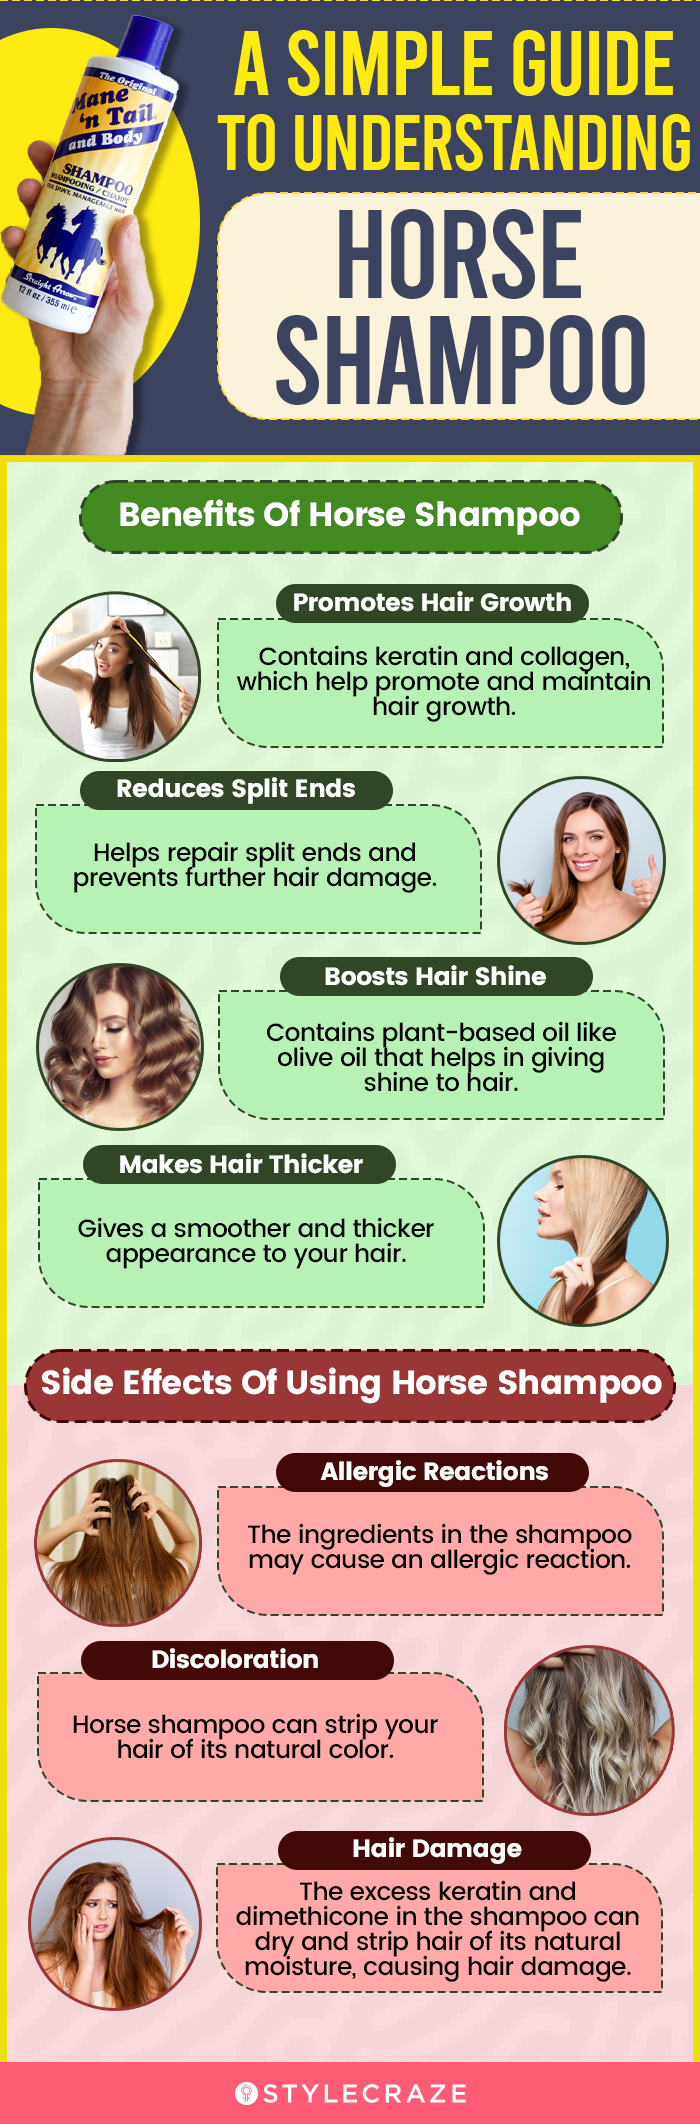 a simple guide to understanding horse shampoo (infographic)